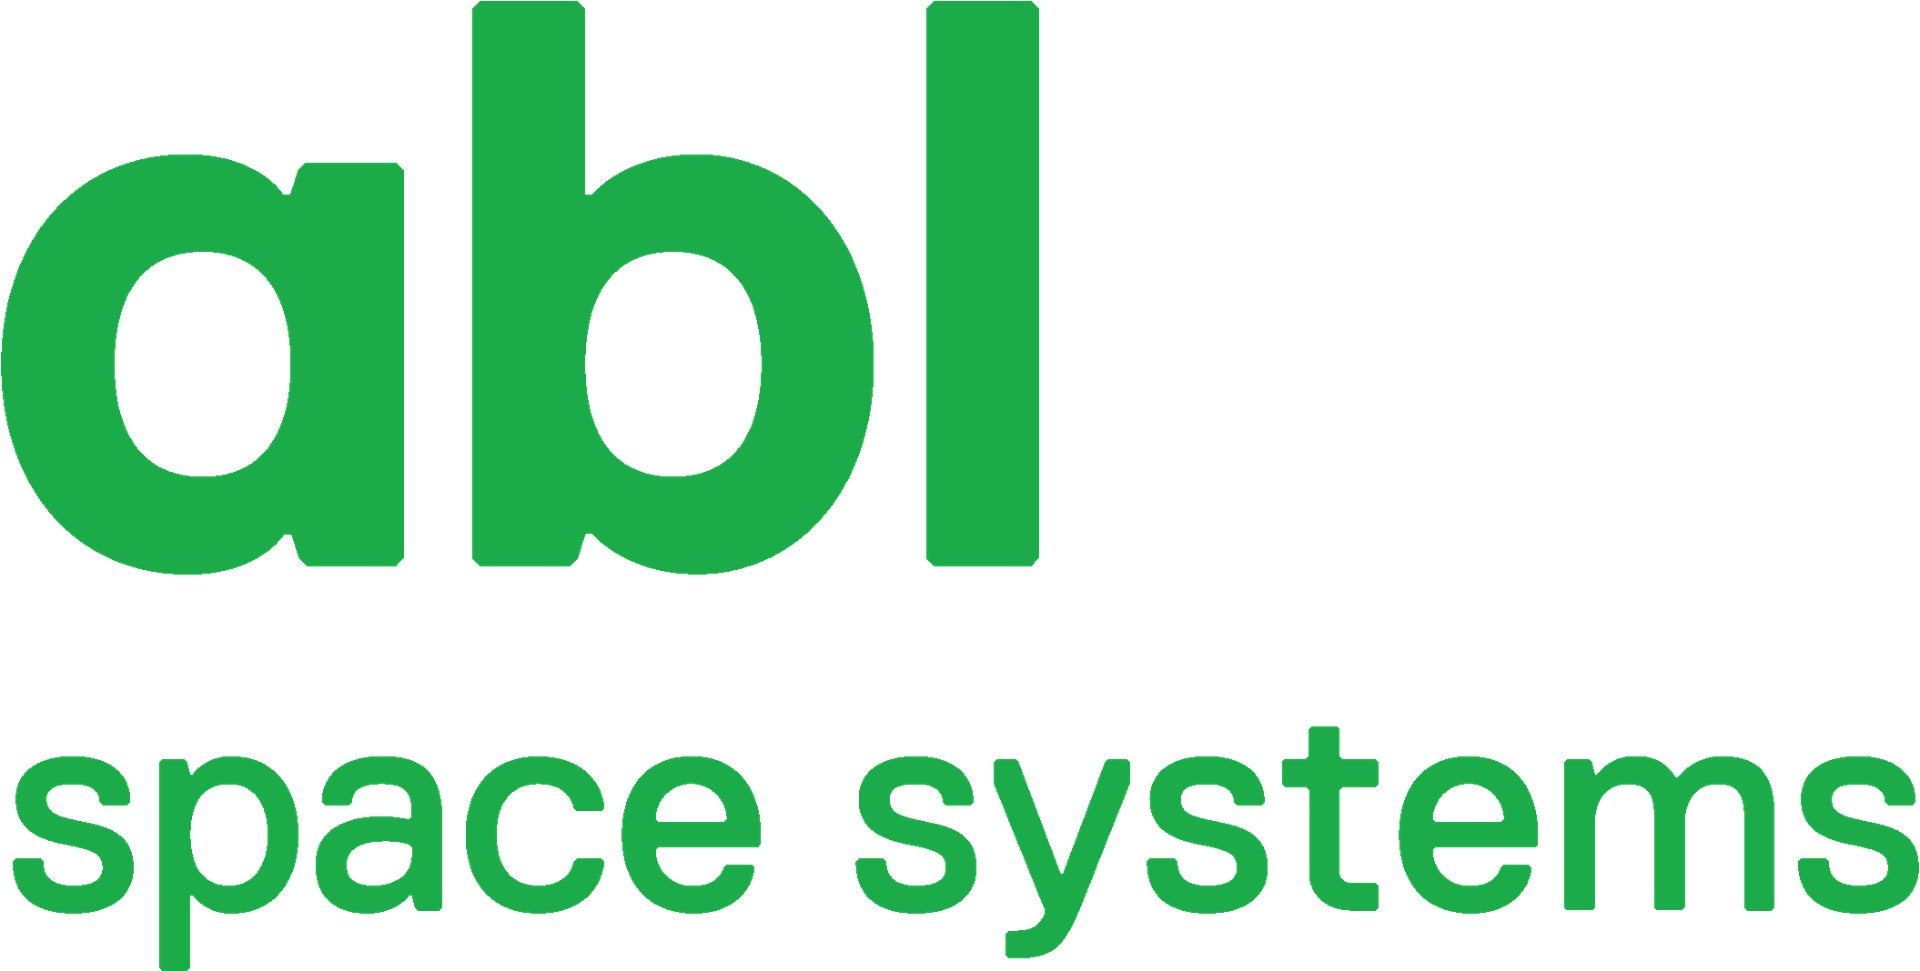 ABL Space Systems's logo